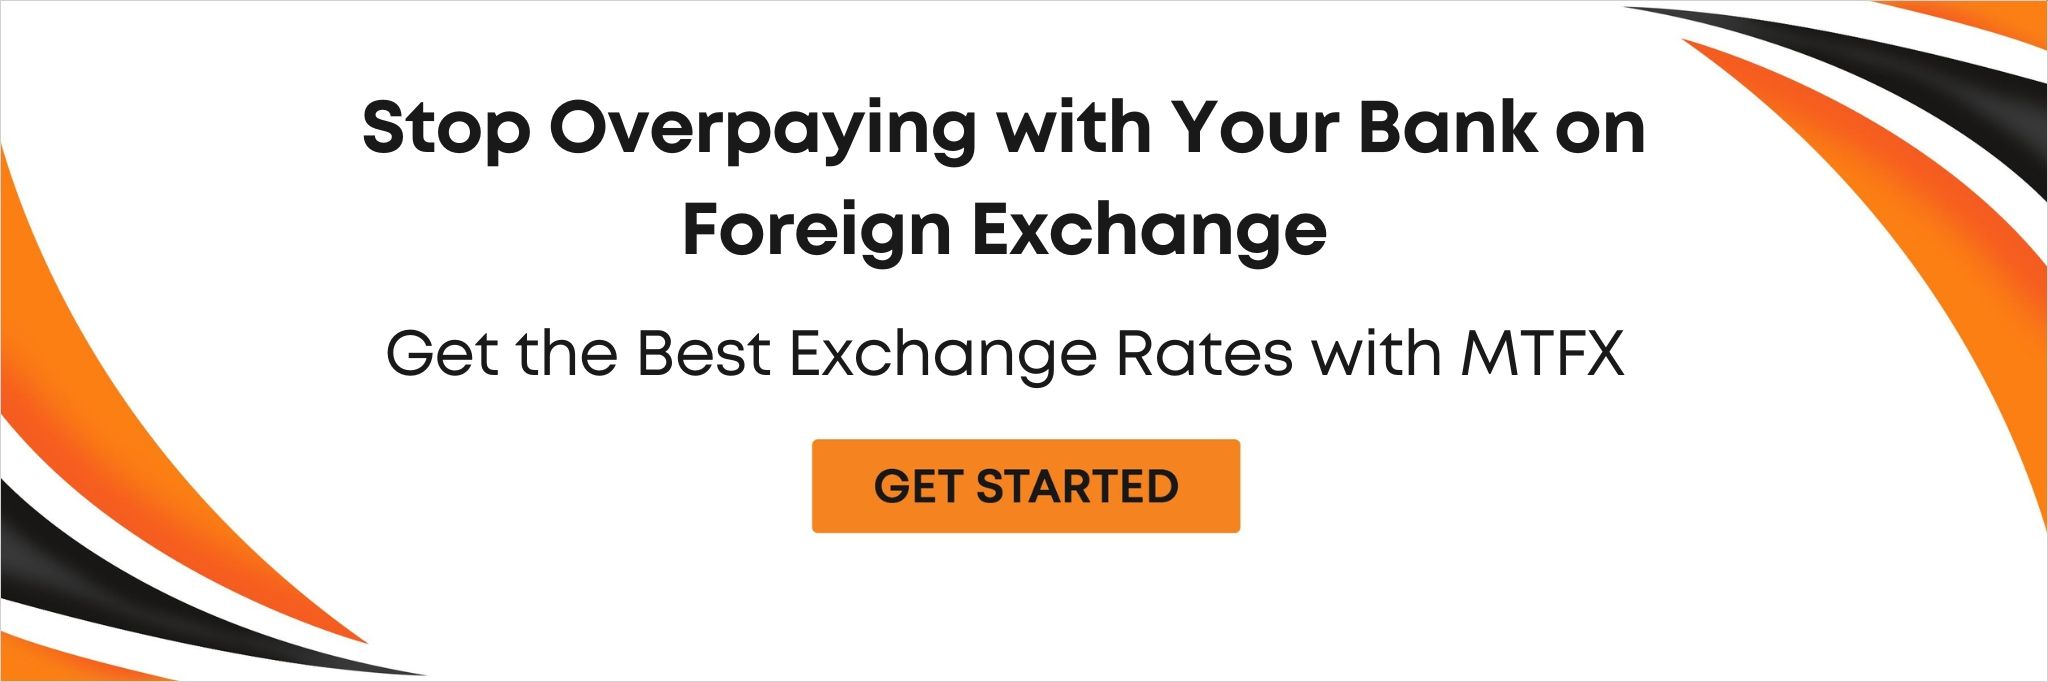 Stop Overpaying with Your Bank on Foreign Exchange